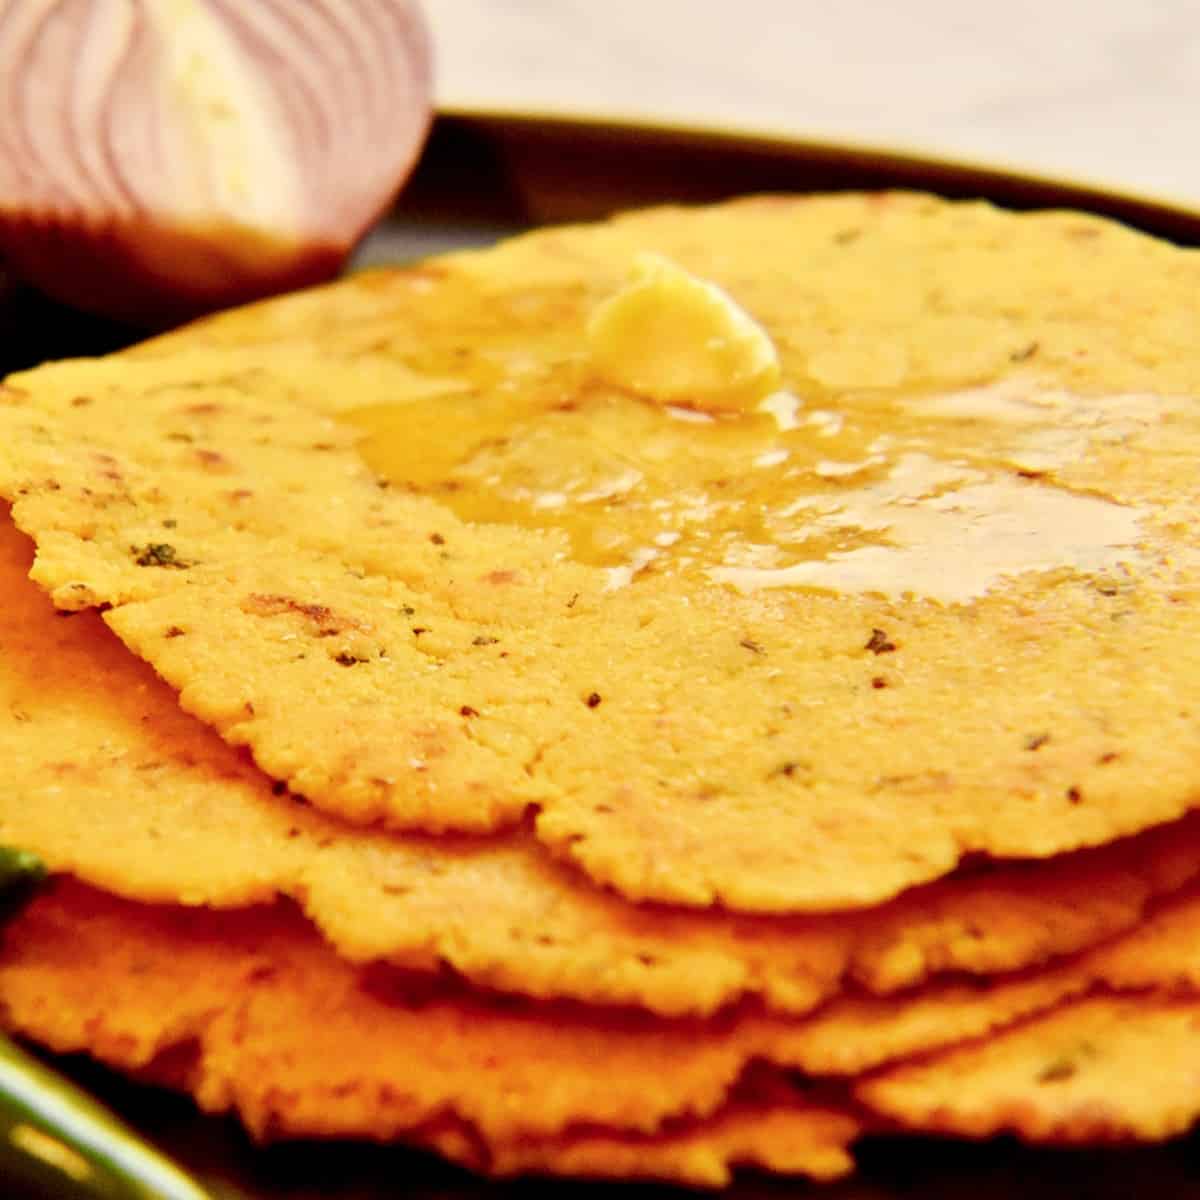 A black plate with cooked Makki ki roti (cornmeal flatbread) topped with a dollop of butter and surrounded by fresh vegetables.